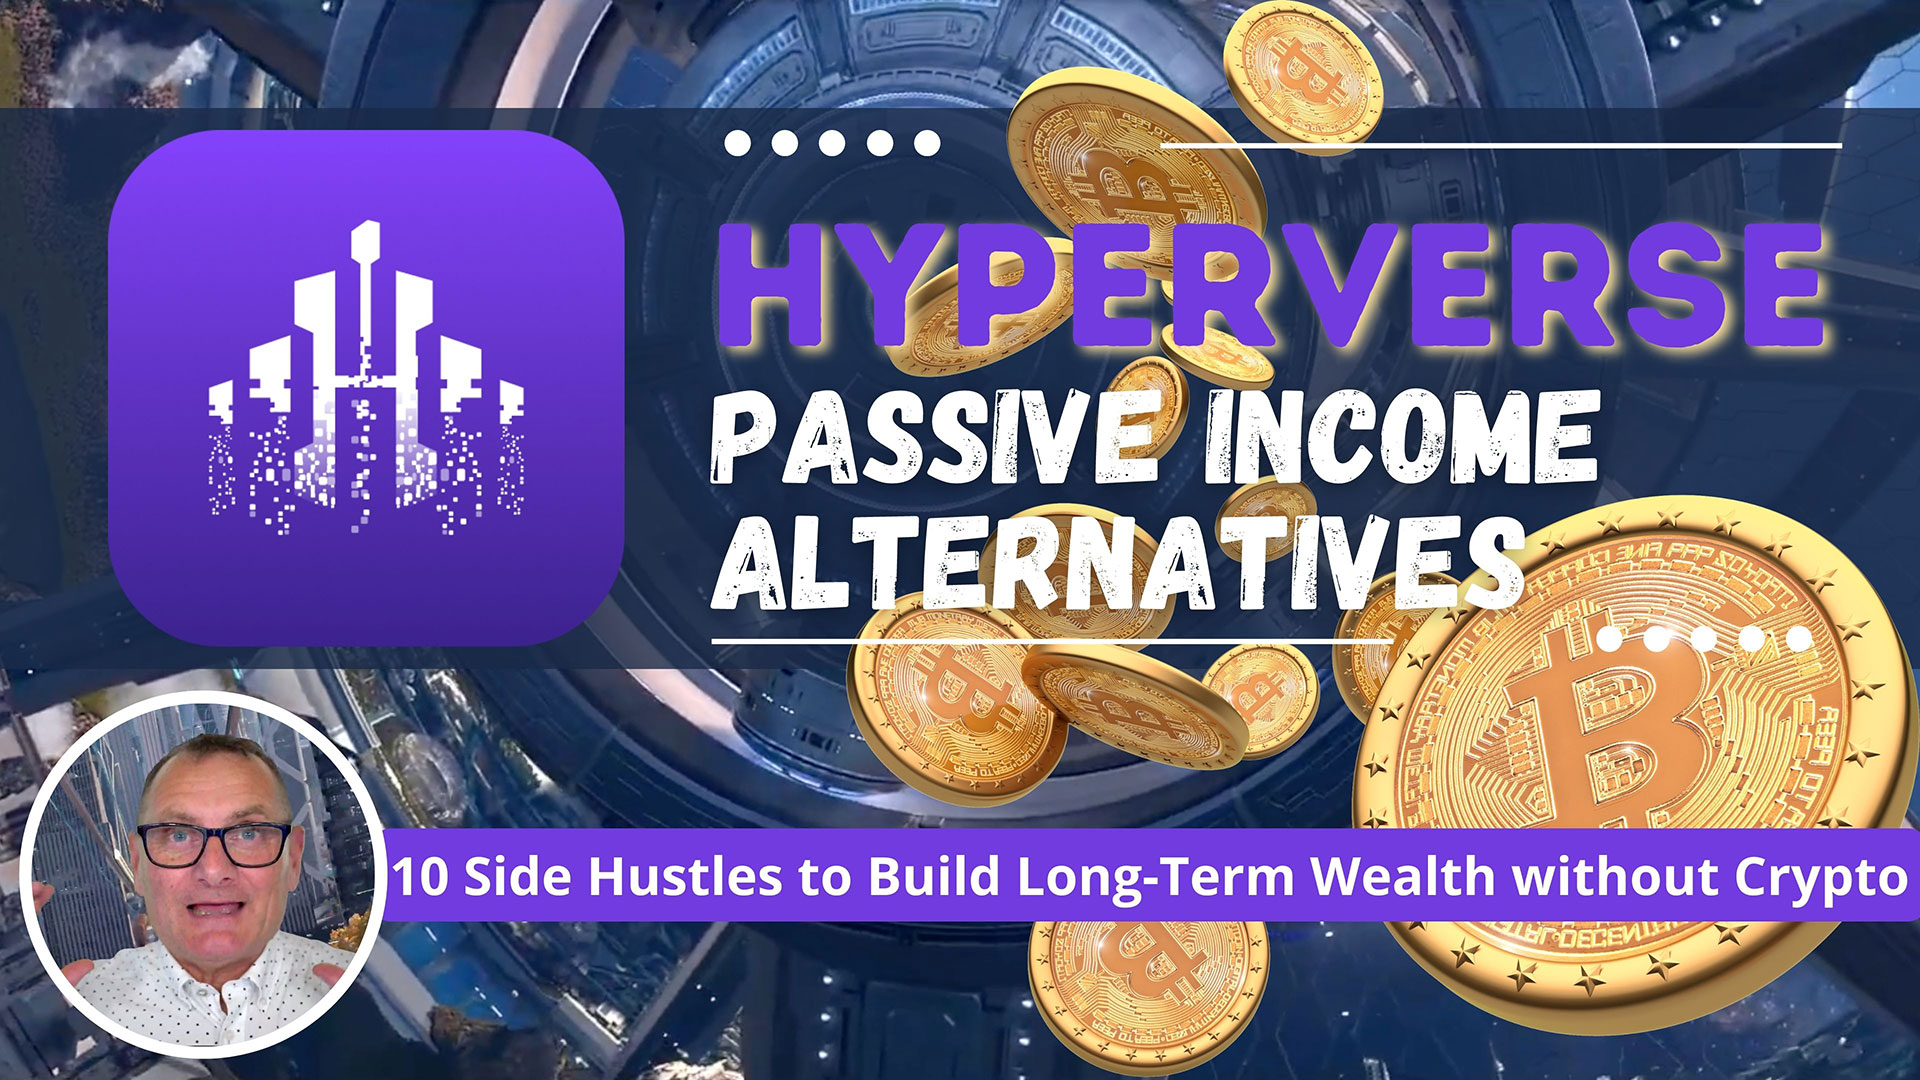 HyperVerse Passive Income Alternatives 10 Side Hustles to Build Long Term Wealth without Crypto Entrepreneur Decision Maker Connector Podcaster Educator